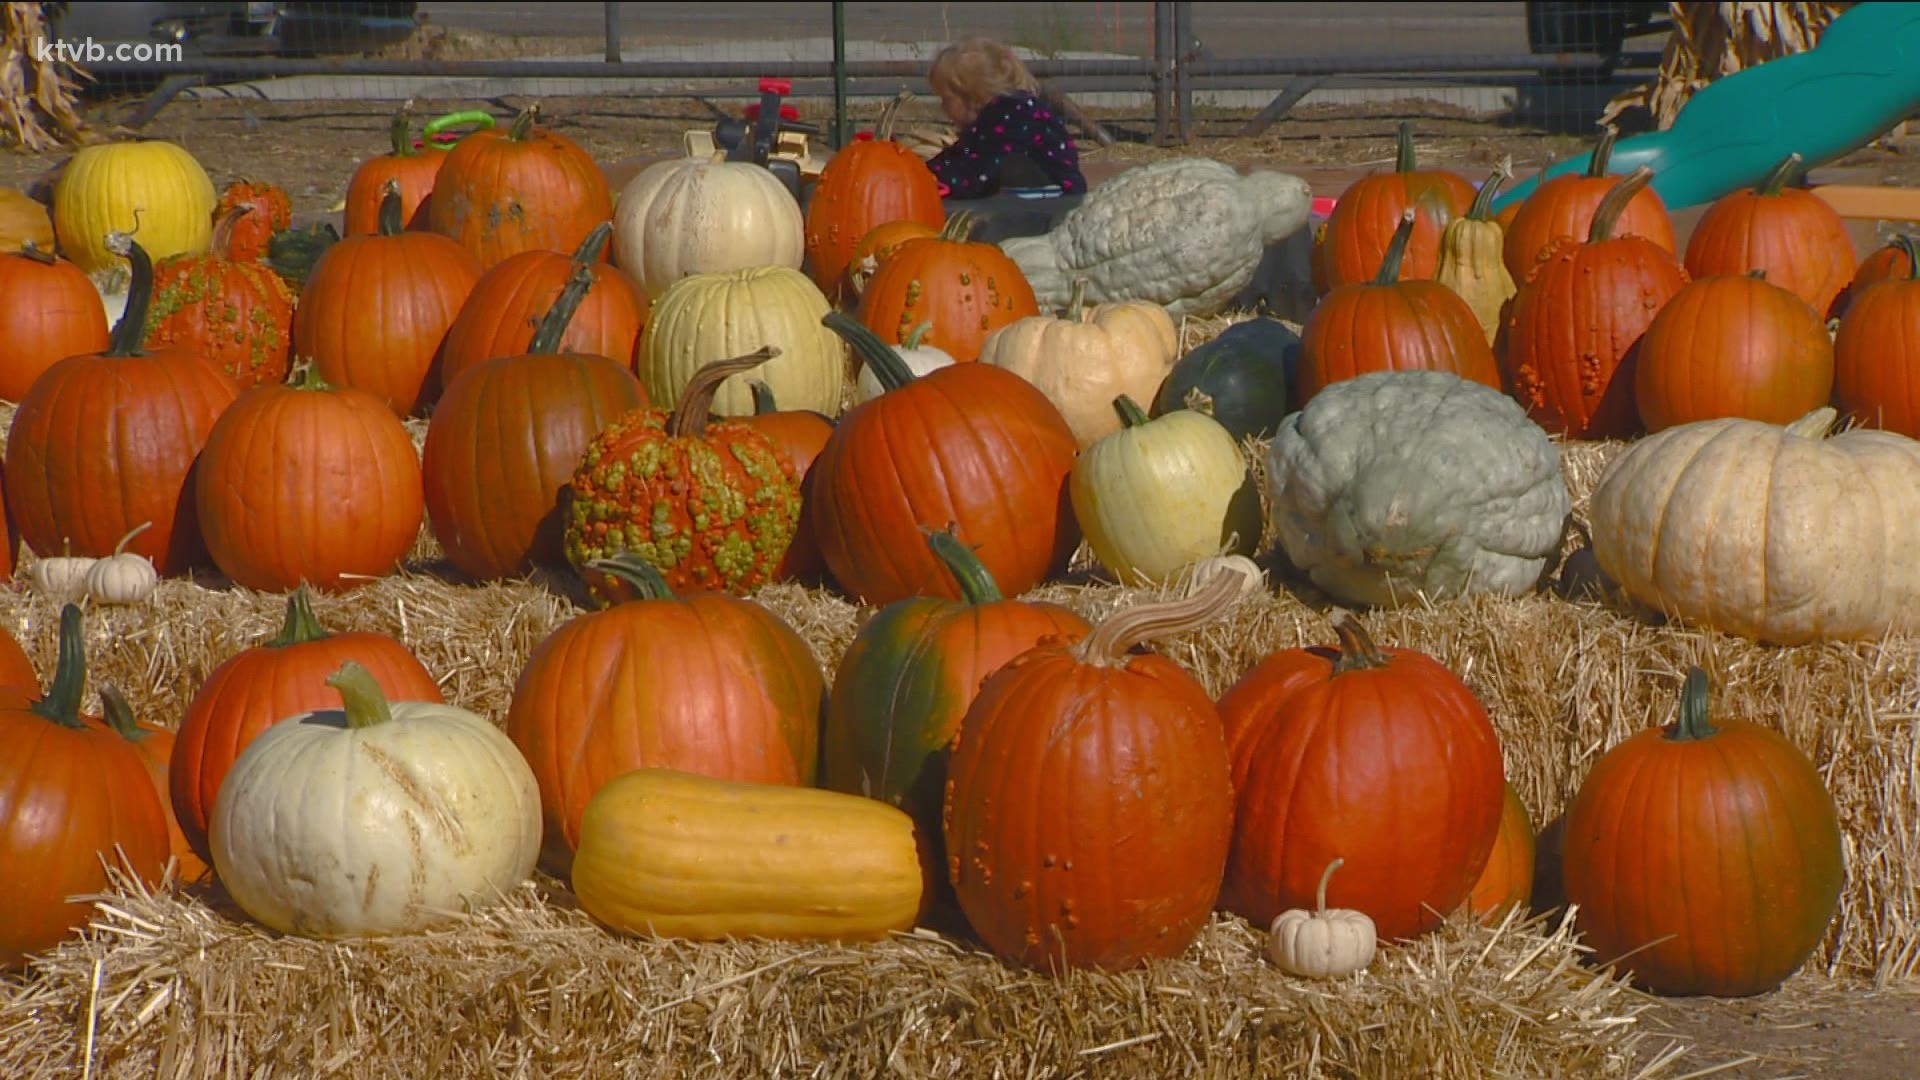 There is a huge variety of pumpkins that you can find, in different colors and shapes, to make your Halloween perfectly unique.